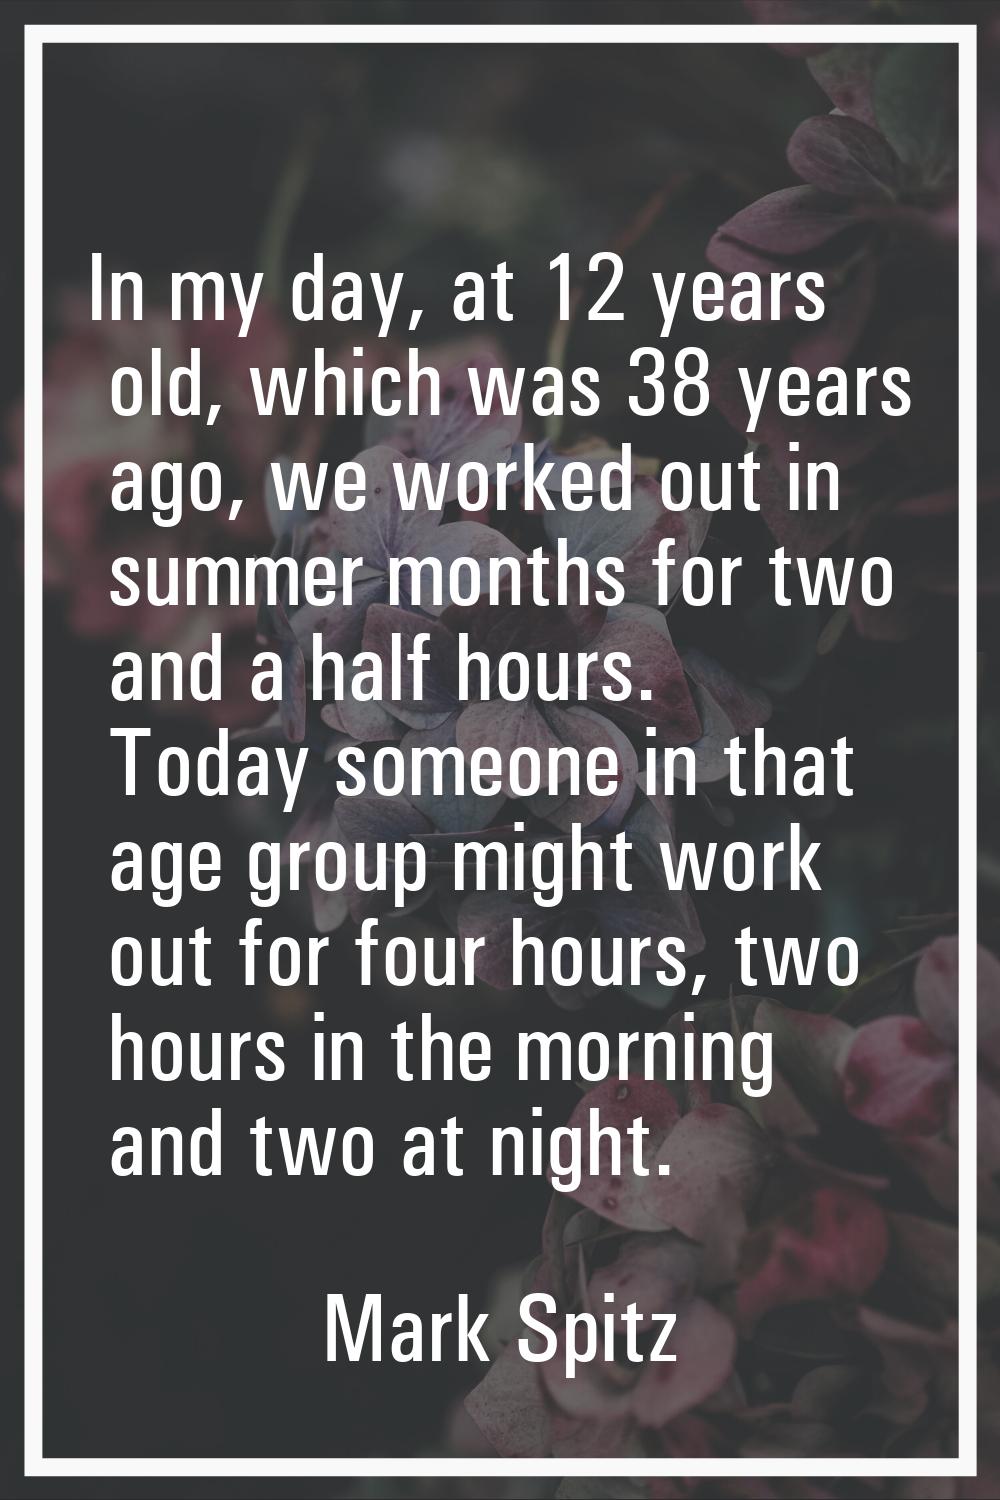 In my day, at 12 years old, which was 38 years ago, we worked out in summer months for two and a ha